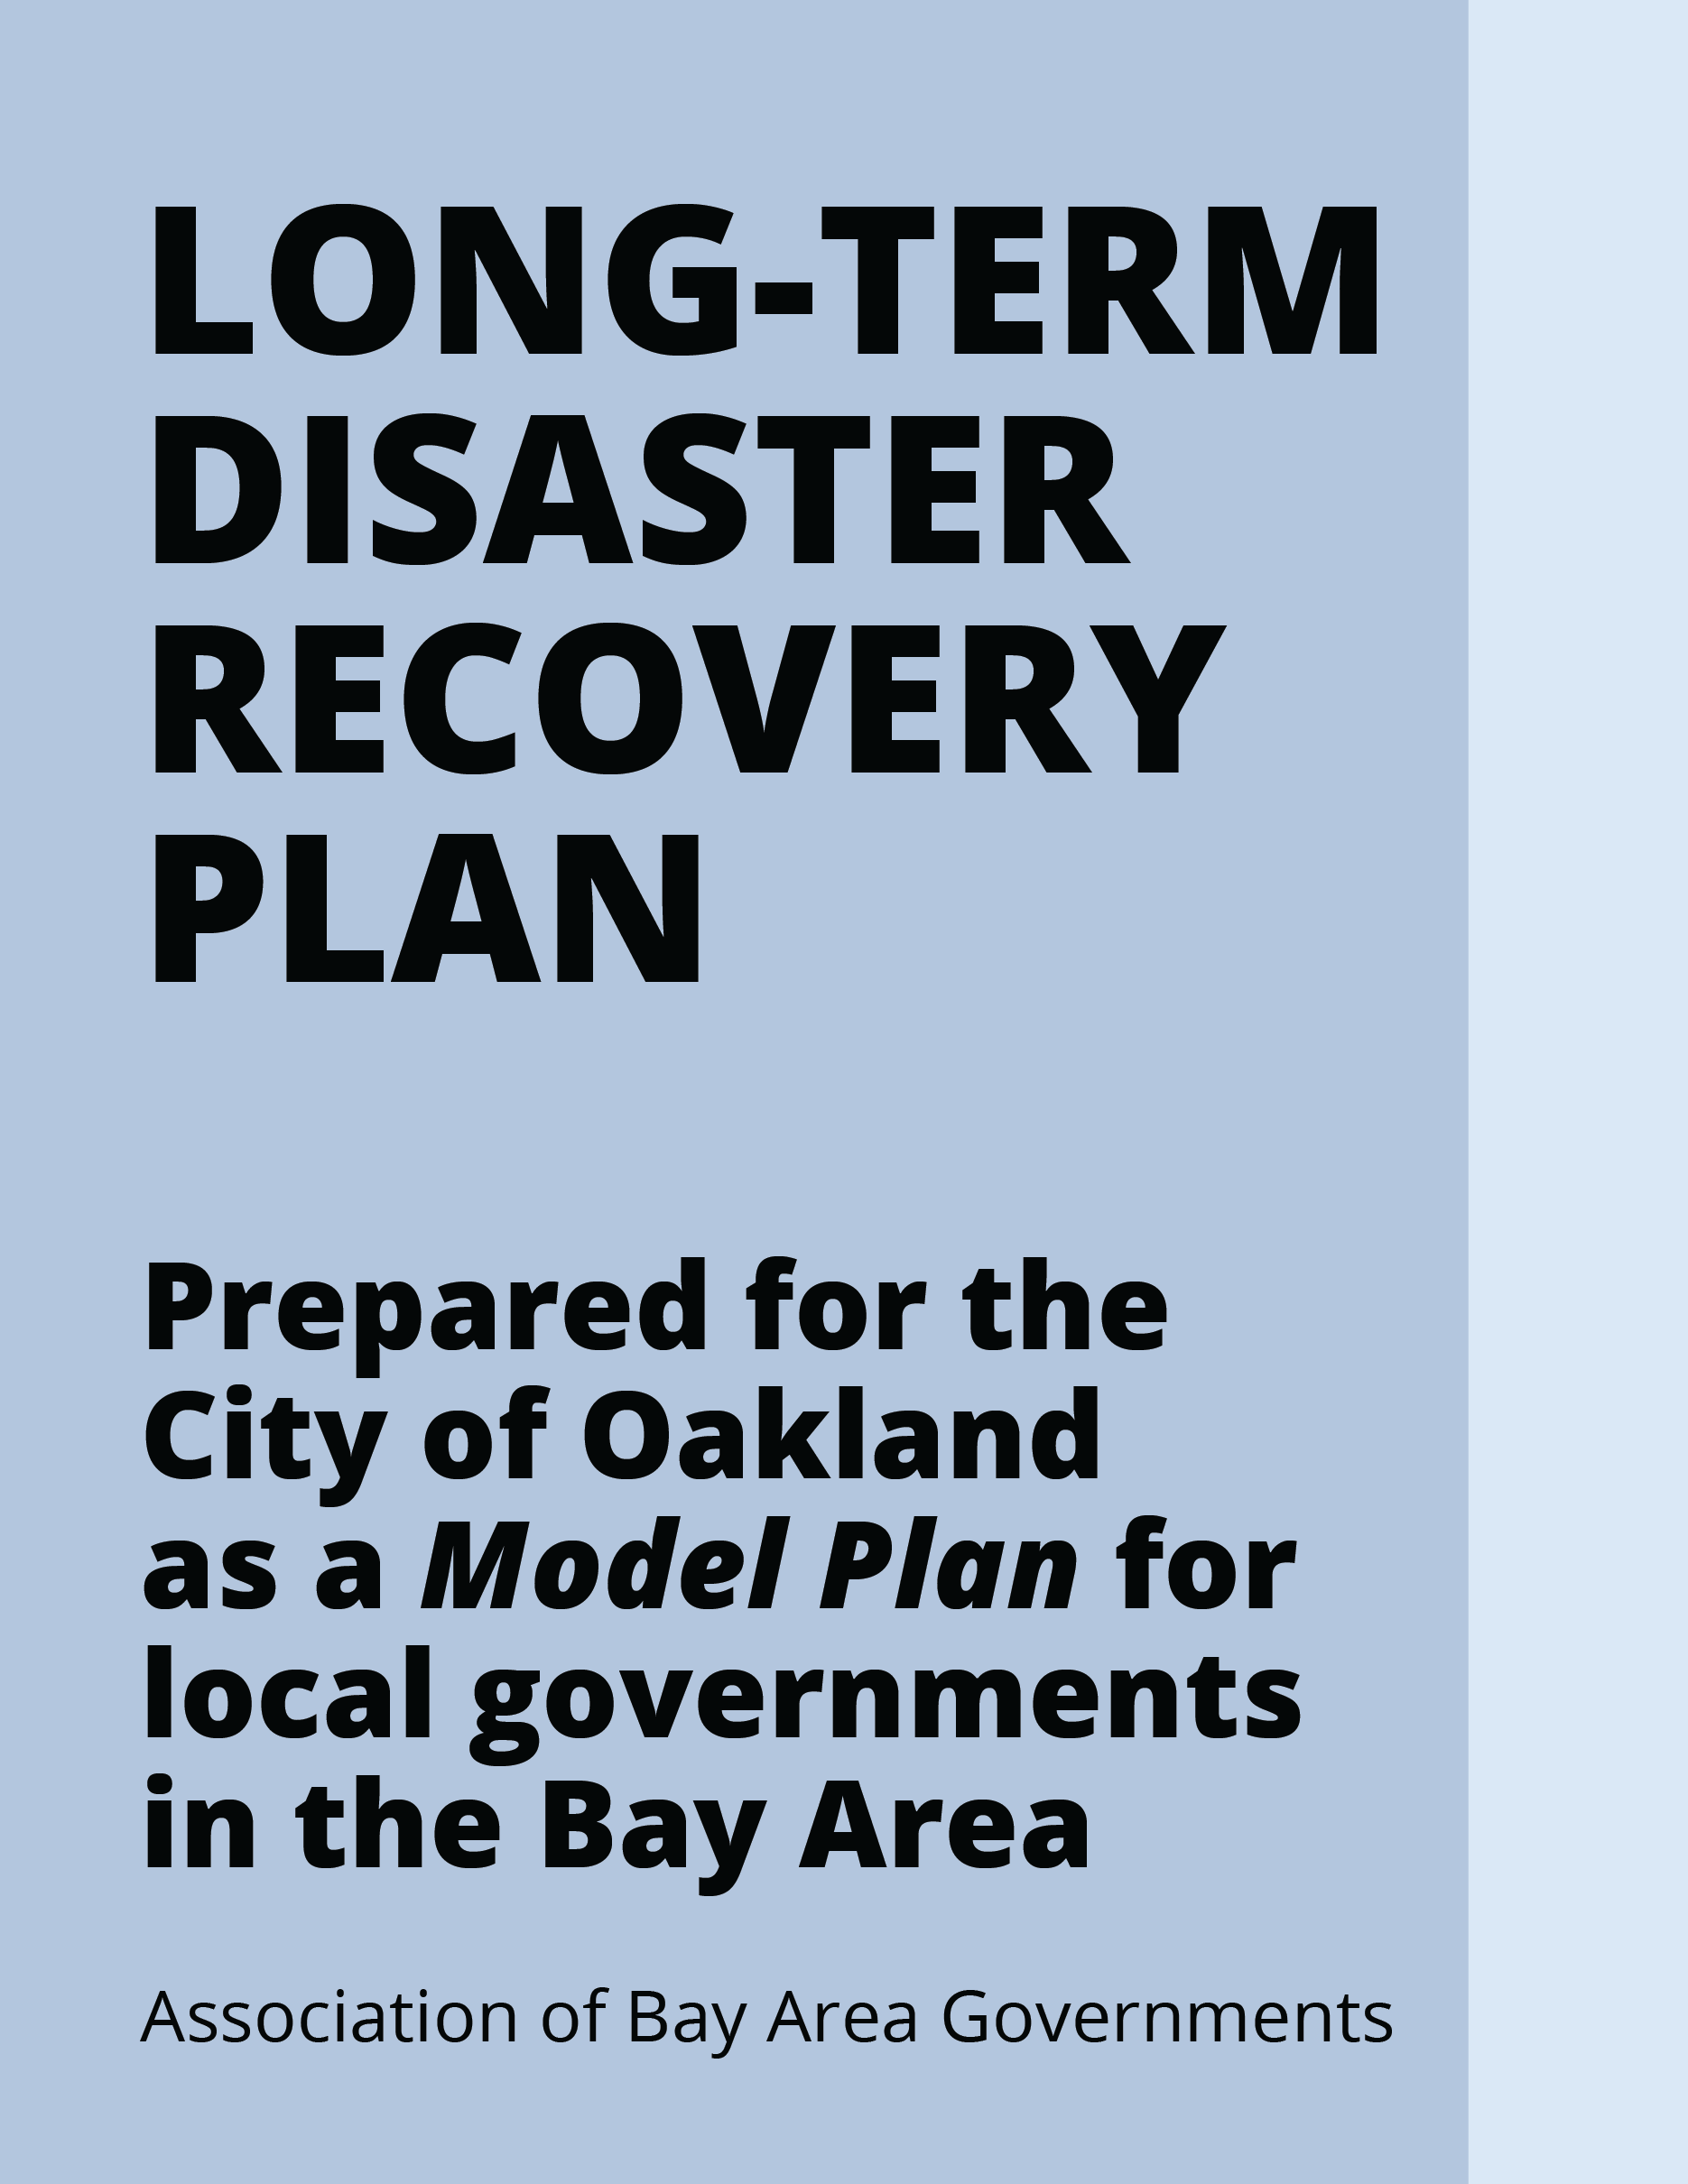 Oakland Long-Term Disaster Recovery Plan 